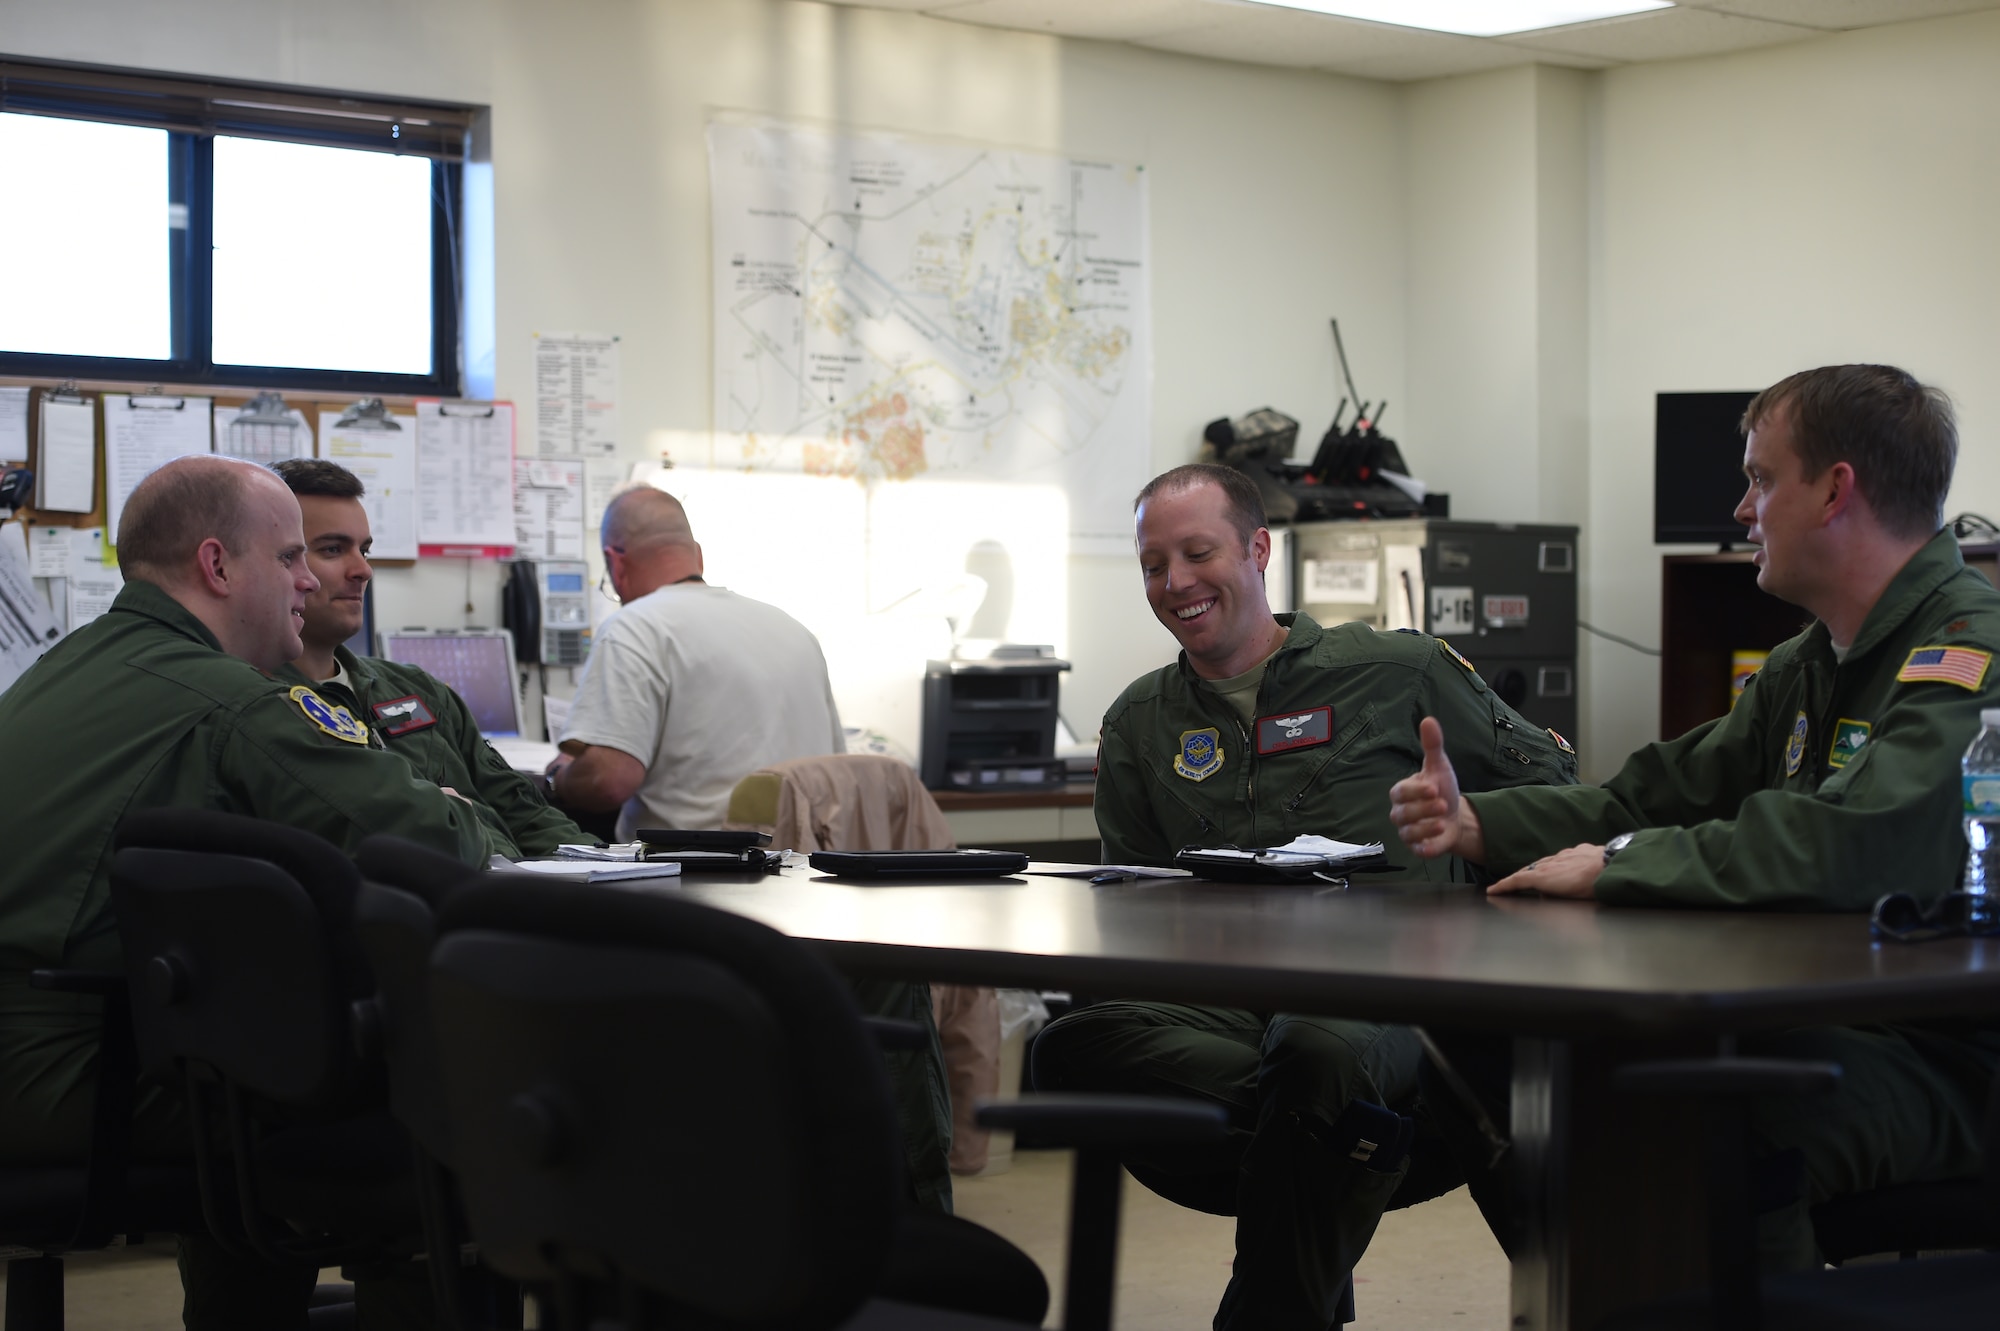 C-5 aircrew from Travis Air Force Base, Calif., and C-17 aircrew from Joint Base Lewis-McChord, Wash., talk prior to flying a mission over test range at Eglin AFB, Fla., March 4, 2016. The two aircrews flew to Eglin to test the aircraft defense systems as part of Air Mobility Command’s flare effectiveness testing. The crews spent more than eight nights ejecting the flares from their aircraft so a team on the ground from AMC and Georgia Tech Research Institute and other partners could analyze the results of the test. (U.S. Air Force photo/Staff Sgt. Naomi Shipley)